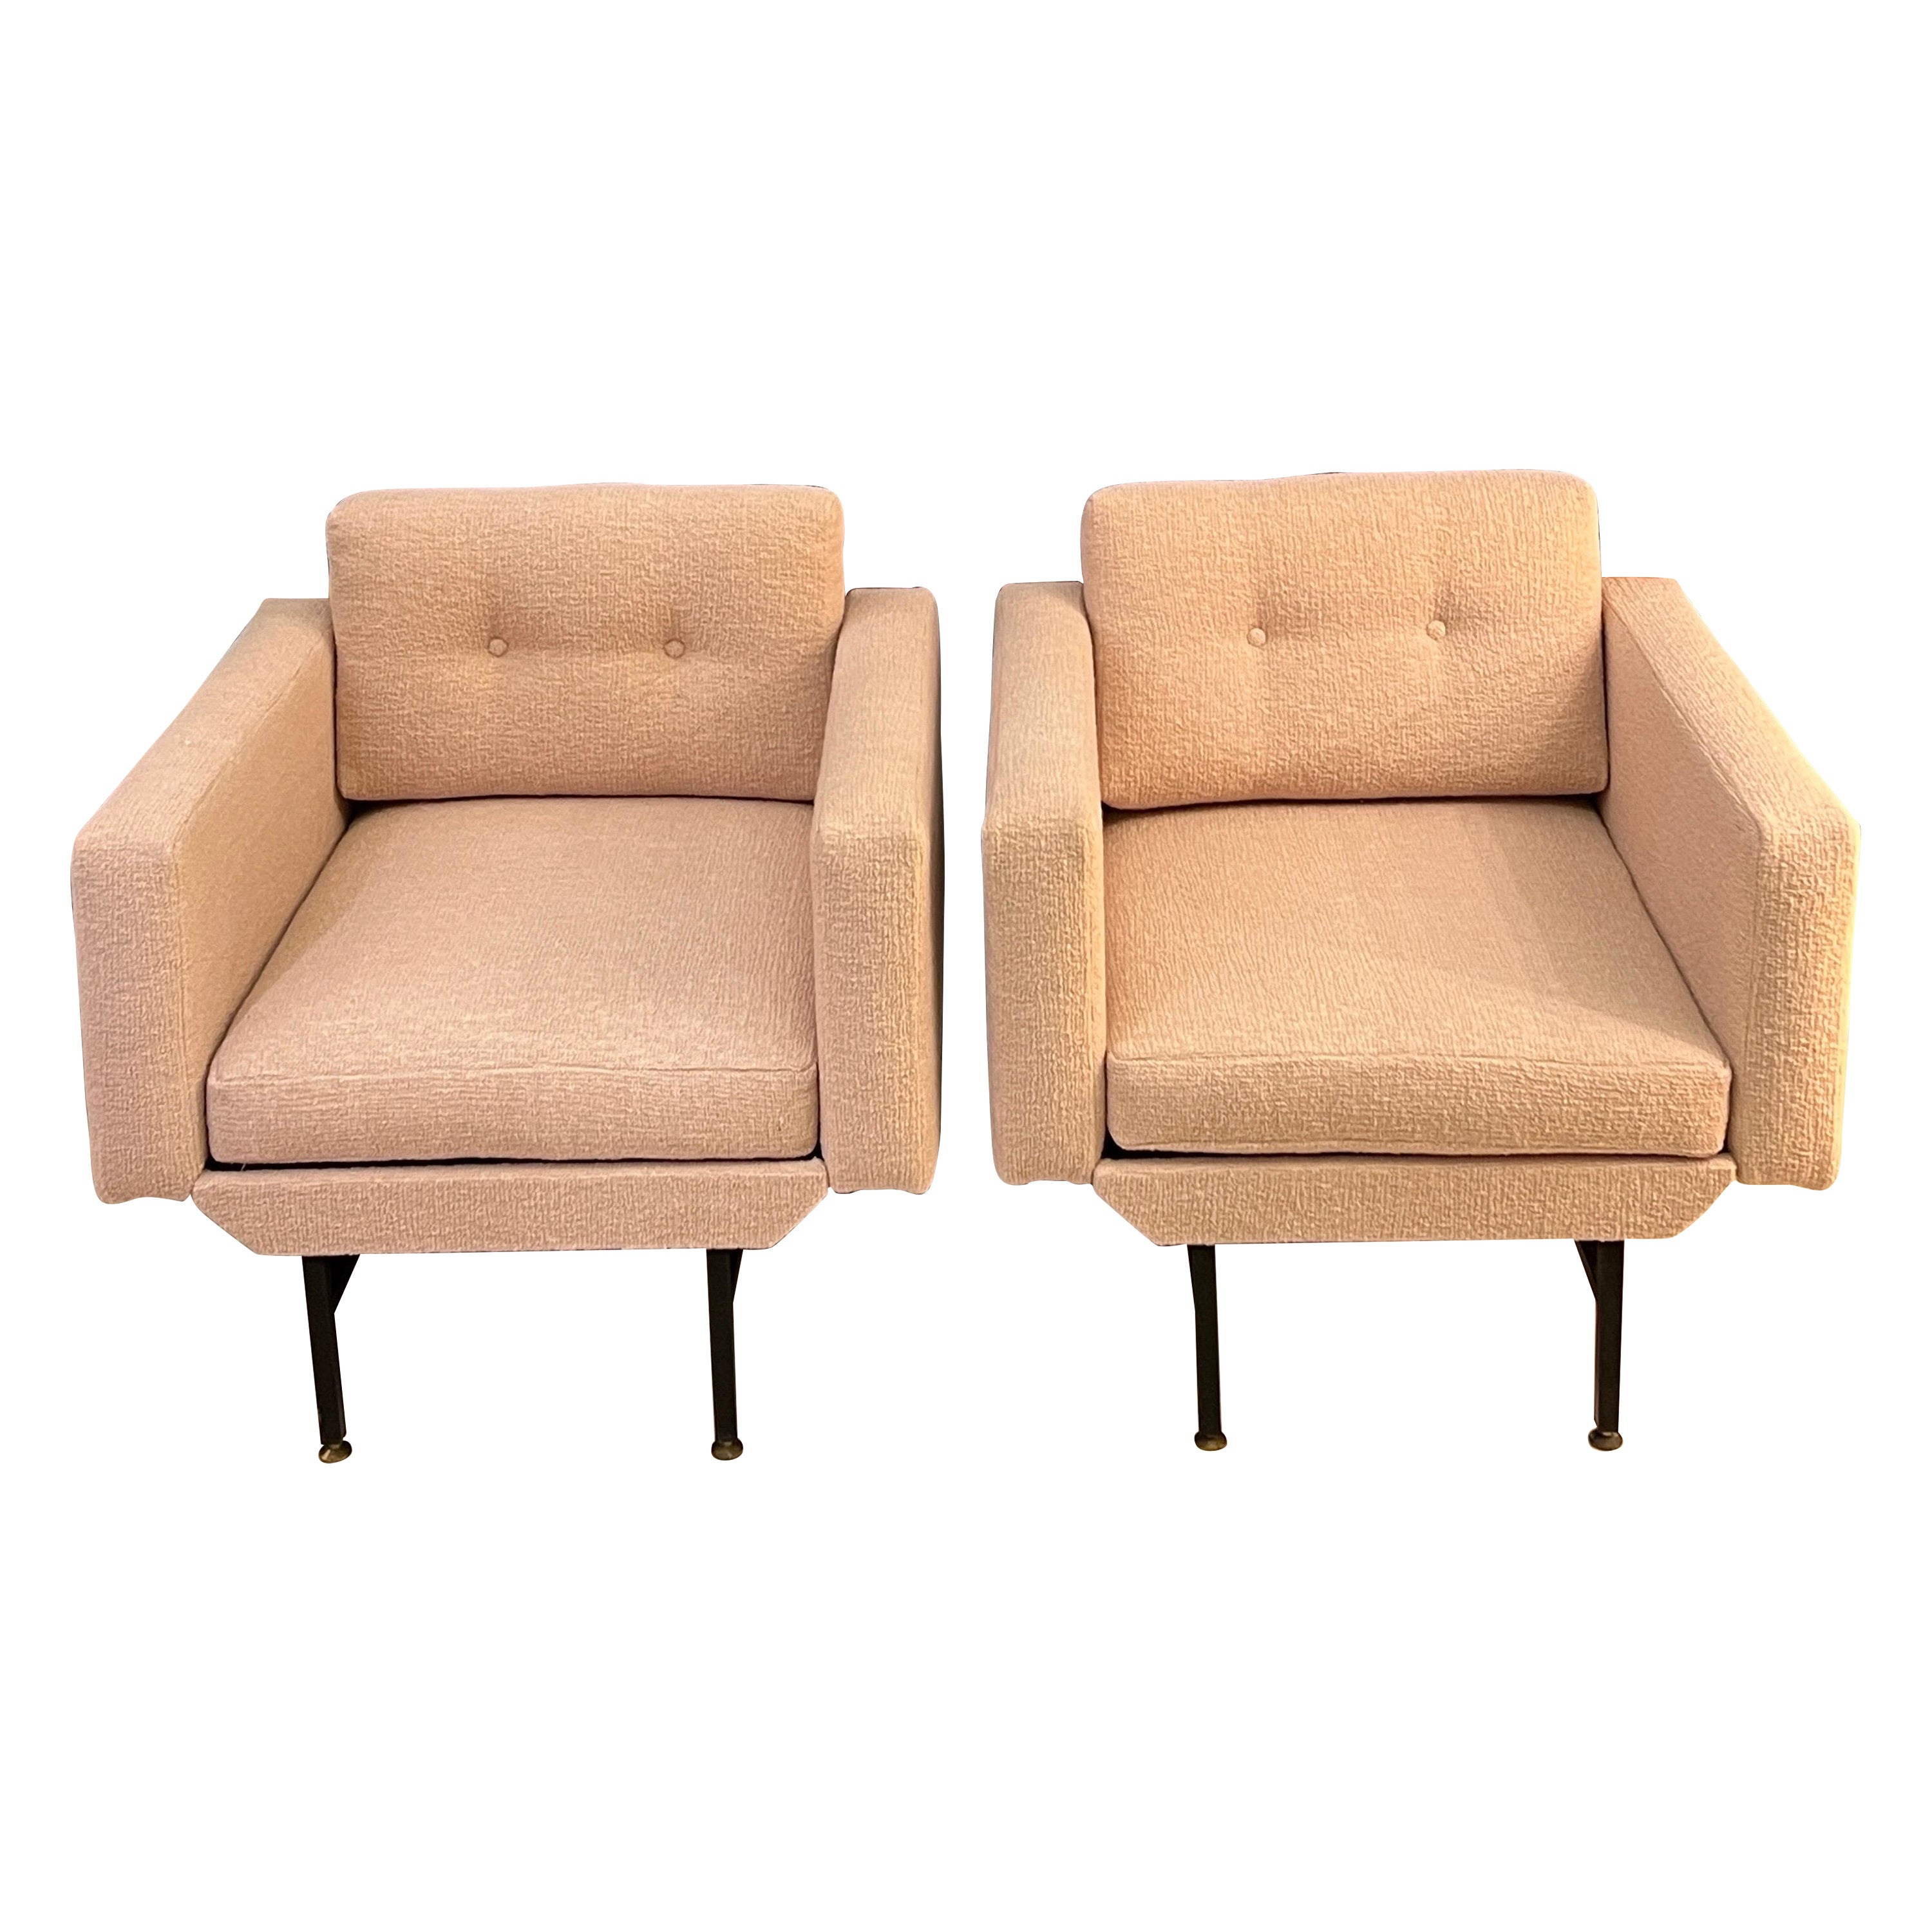 Pair of Newly Upholstered Pale Pink Bouclé Armchairs, Mid- Century era.
The structure is made of black metal and brass final.
Perfect vintage condition.